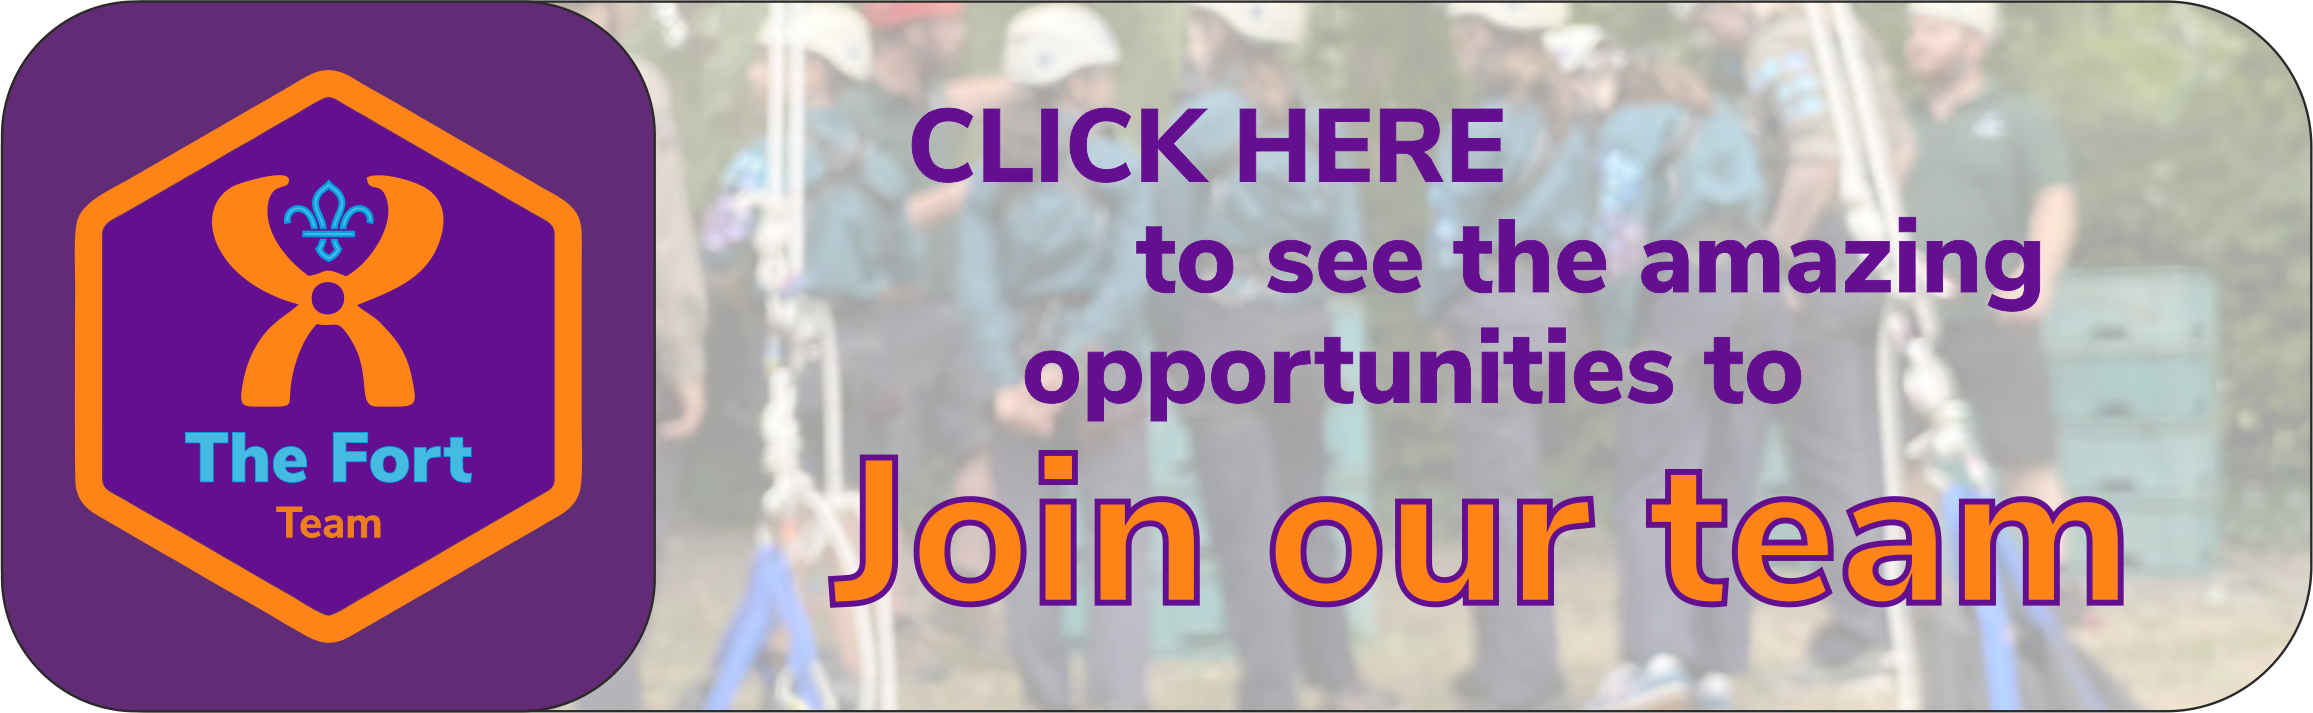 Click here to see the opportunities to join our team 